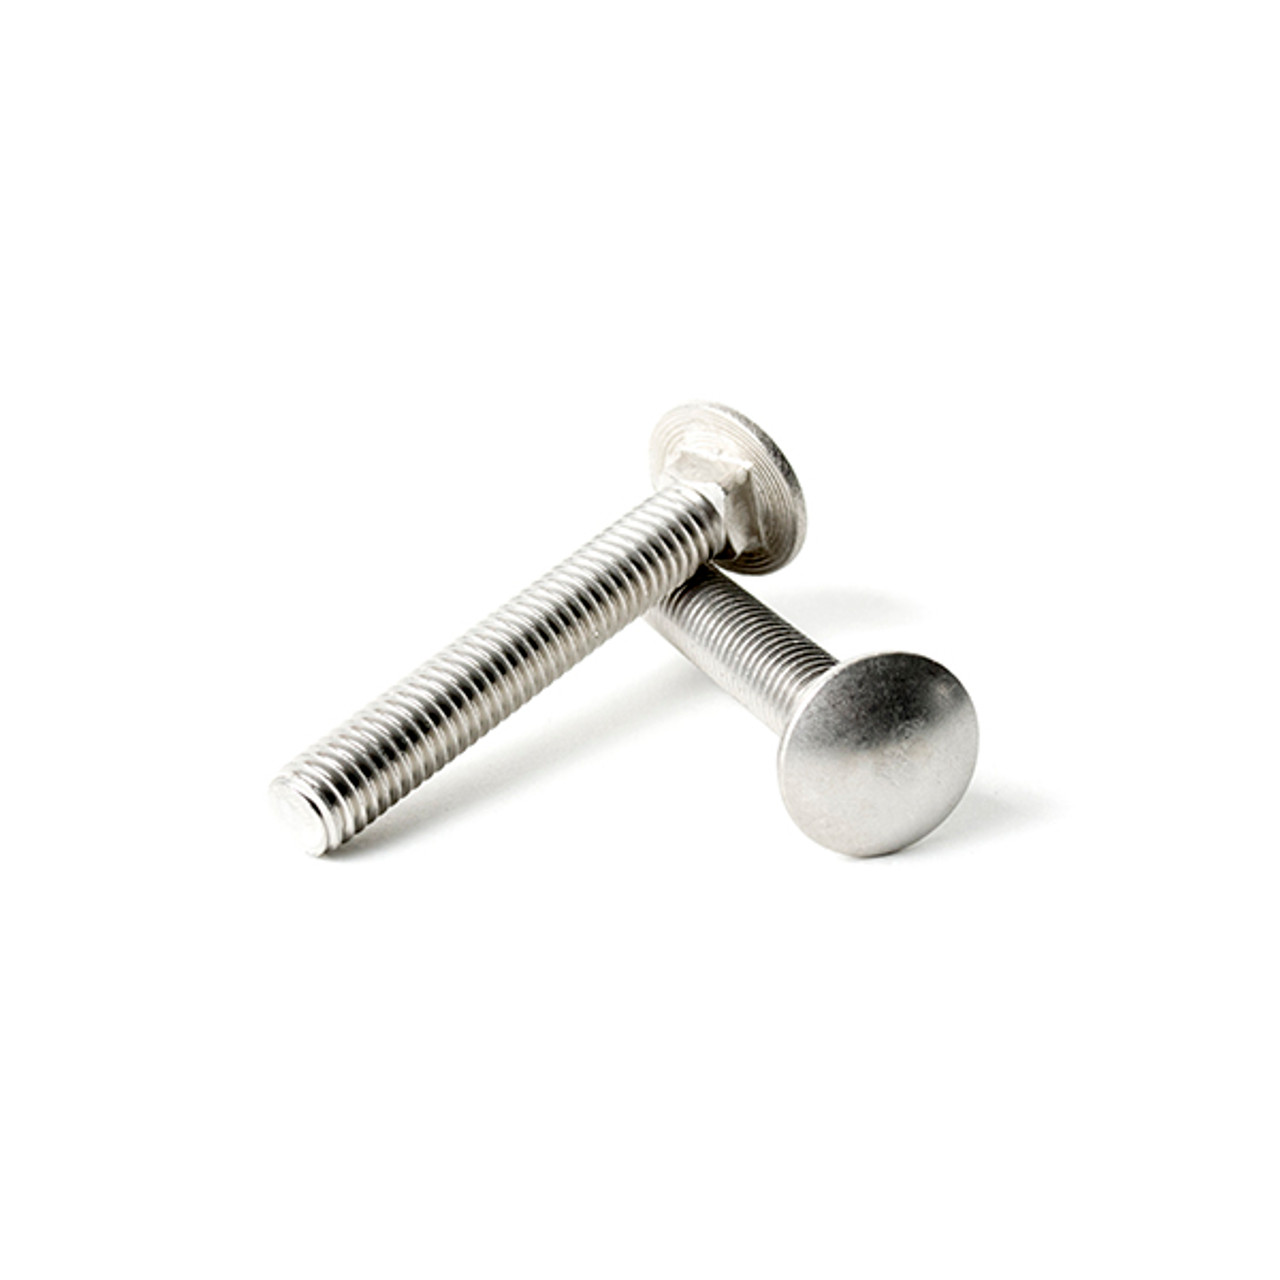 Full Thread 18-8/304 Set #RD-3749FST Warranity by Pr-Mch 3/8-16 x 2 3/4 Stainless Steel Carriage Bolt pcs Package of 100